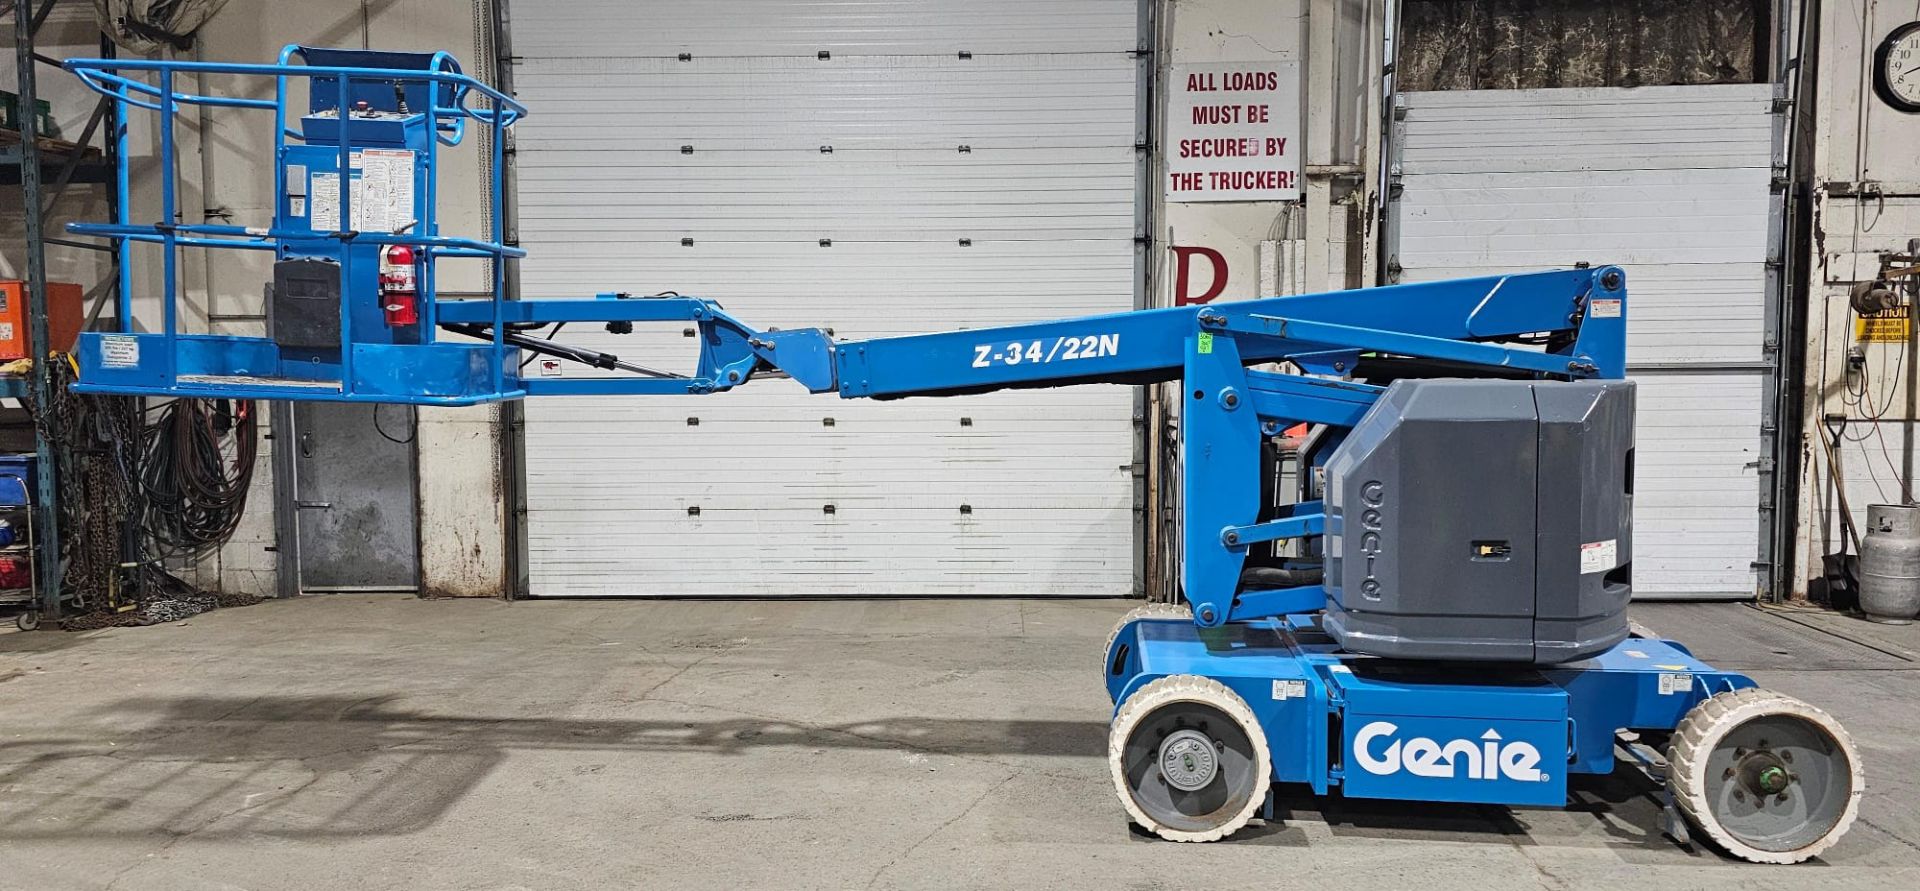 2007 Genie model Z-30-N Zoom Boom Electric Motorized Man Lift 30' Height & 21' Reach - with 24V - Image 2 of 9